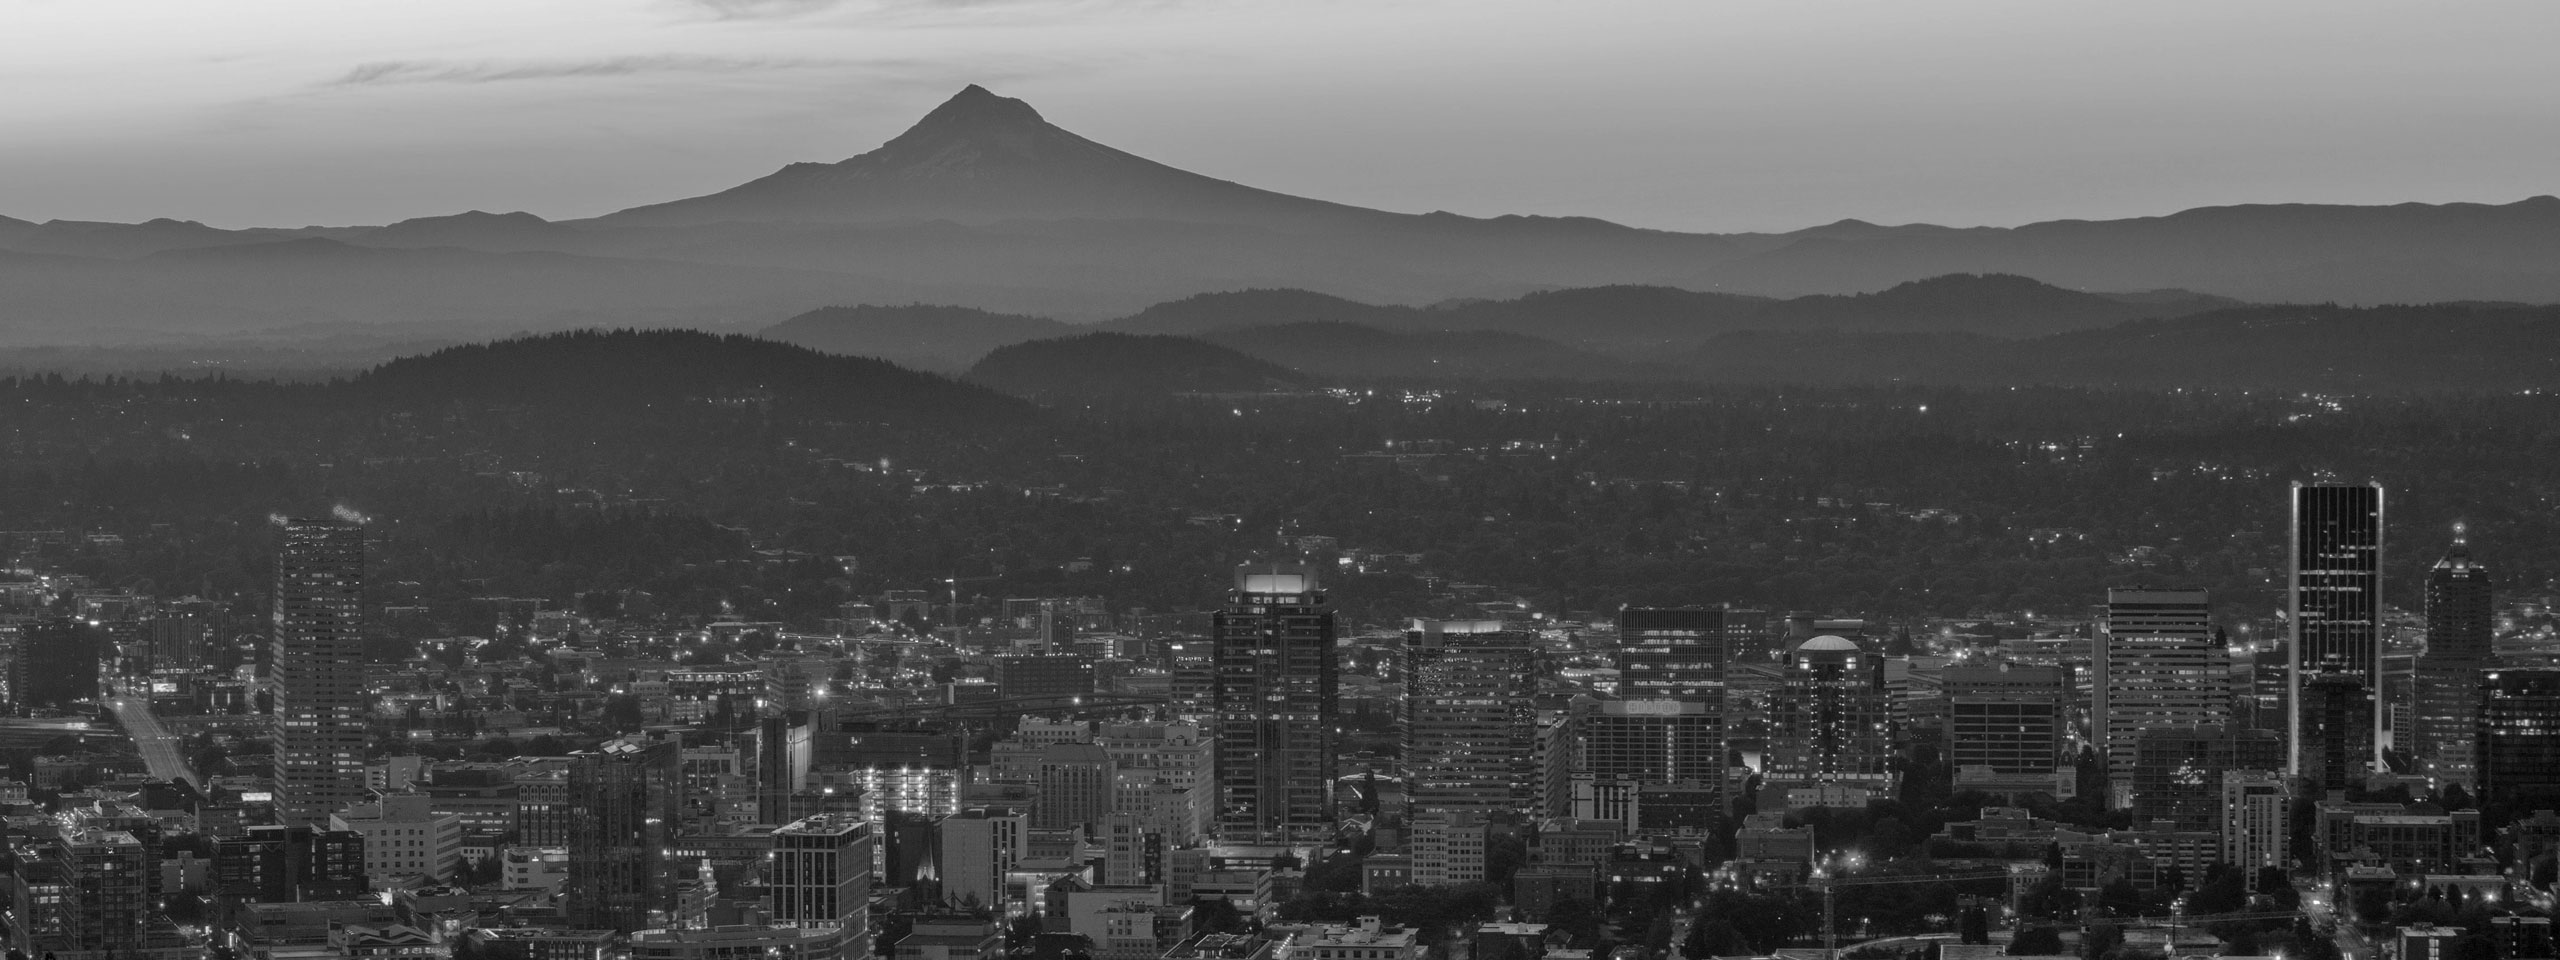 City of Portland, OR with Mt. Hood in the background.